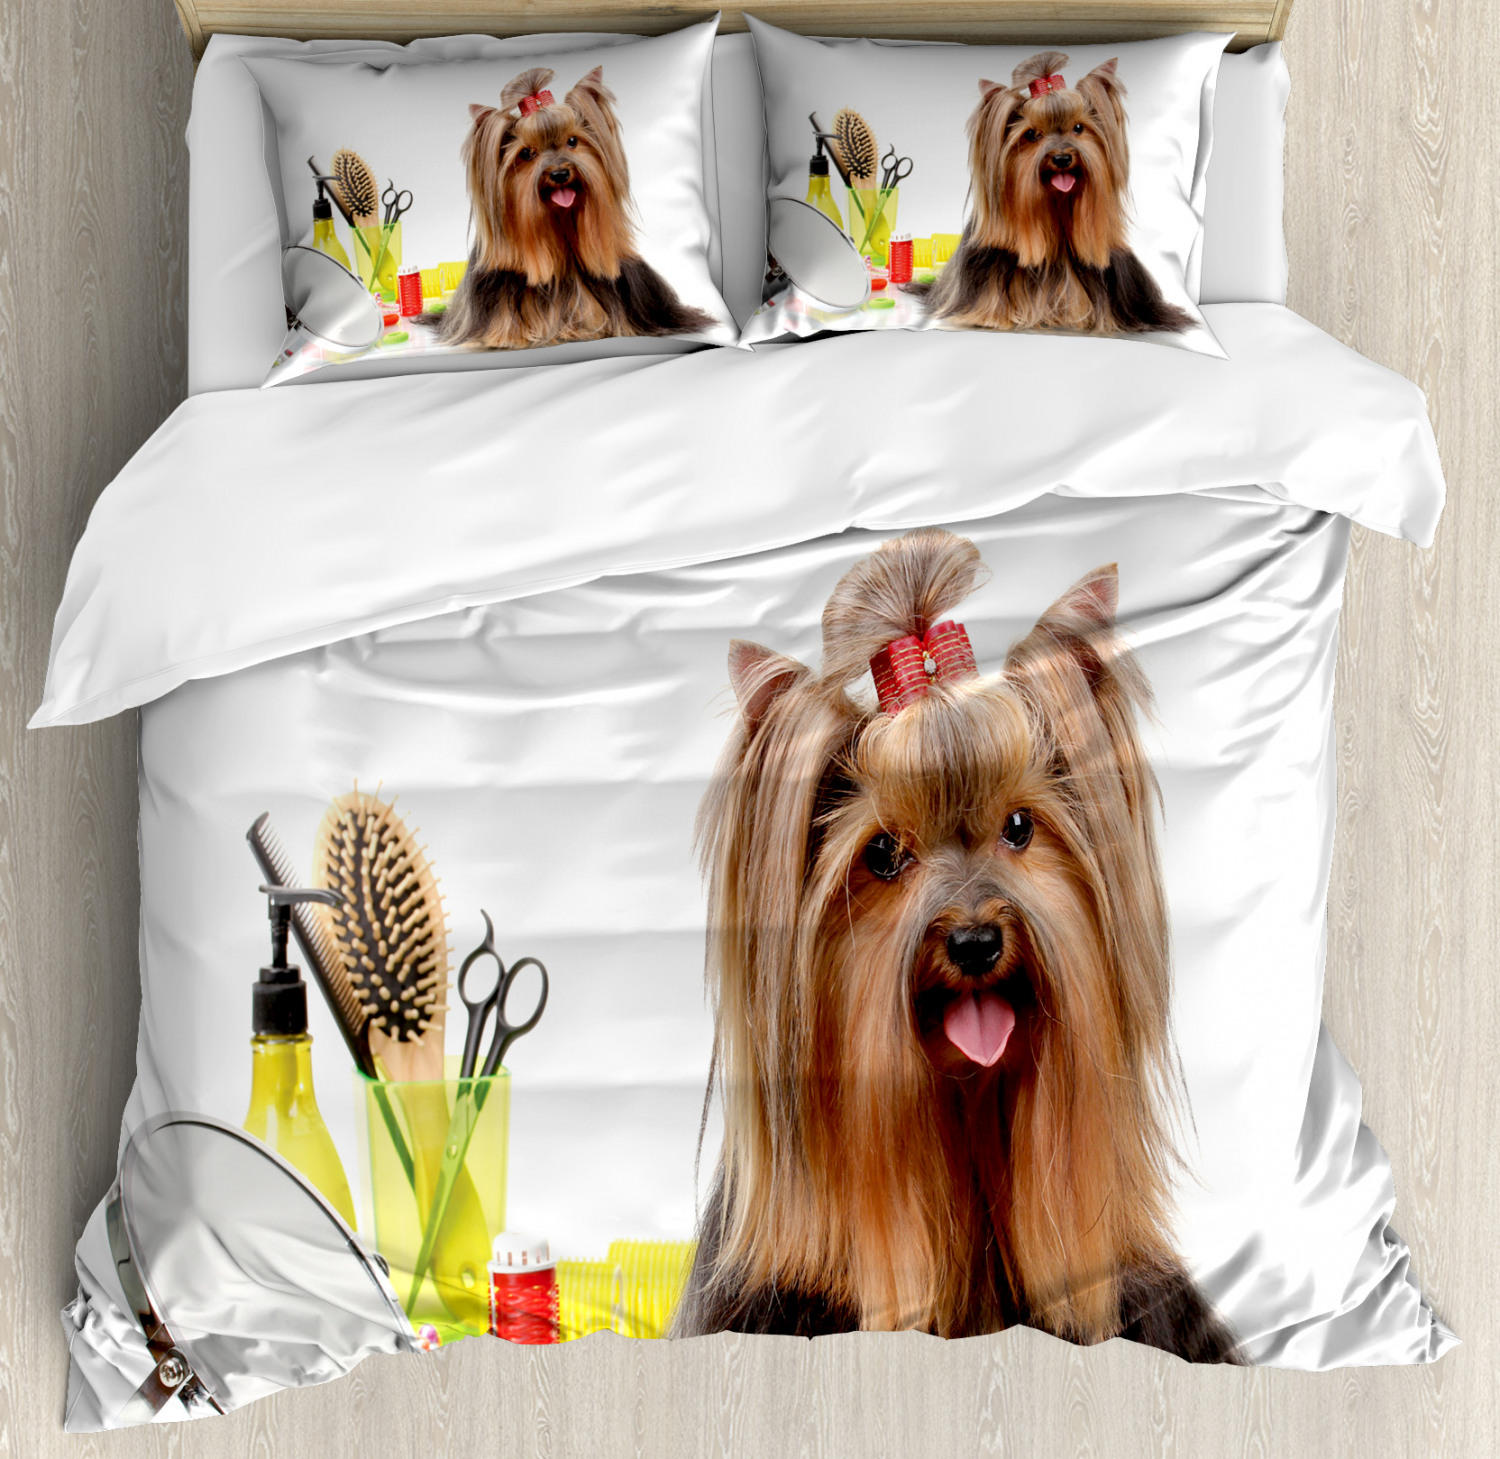 Yorkie Duvet Cover Set With Pillow Shams Cute Hairstyle Puppy Print Ebay